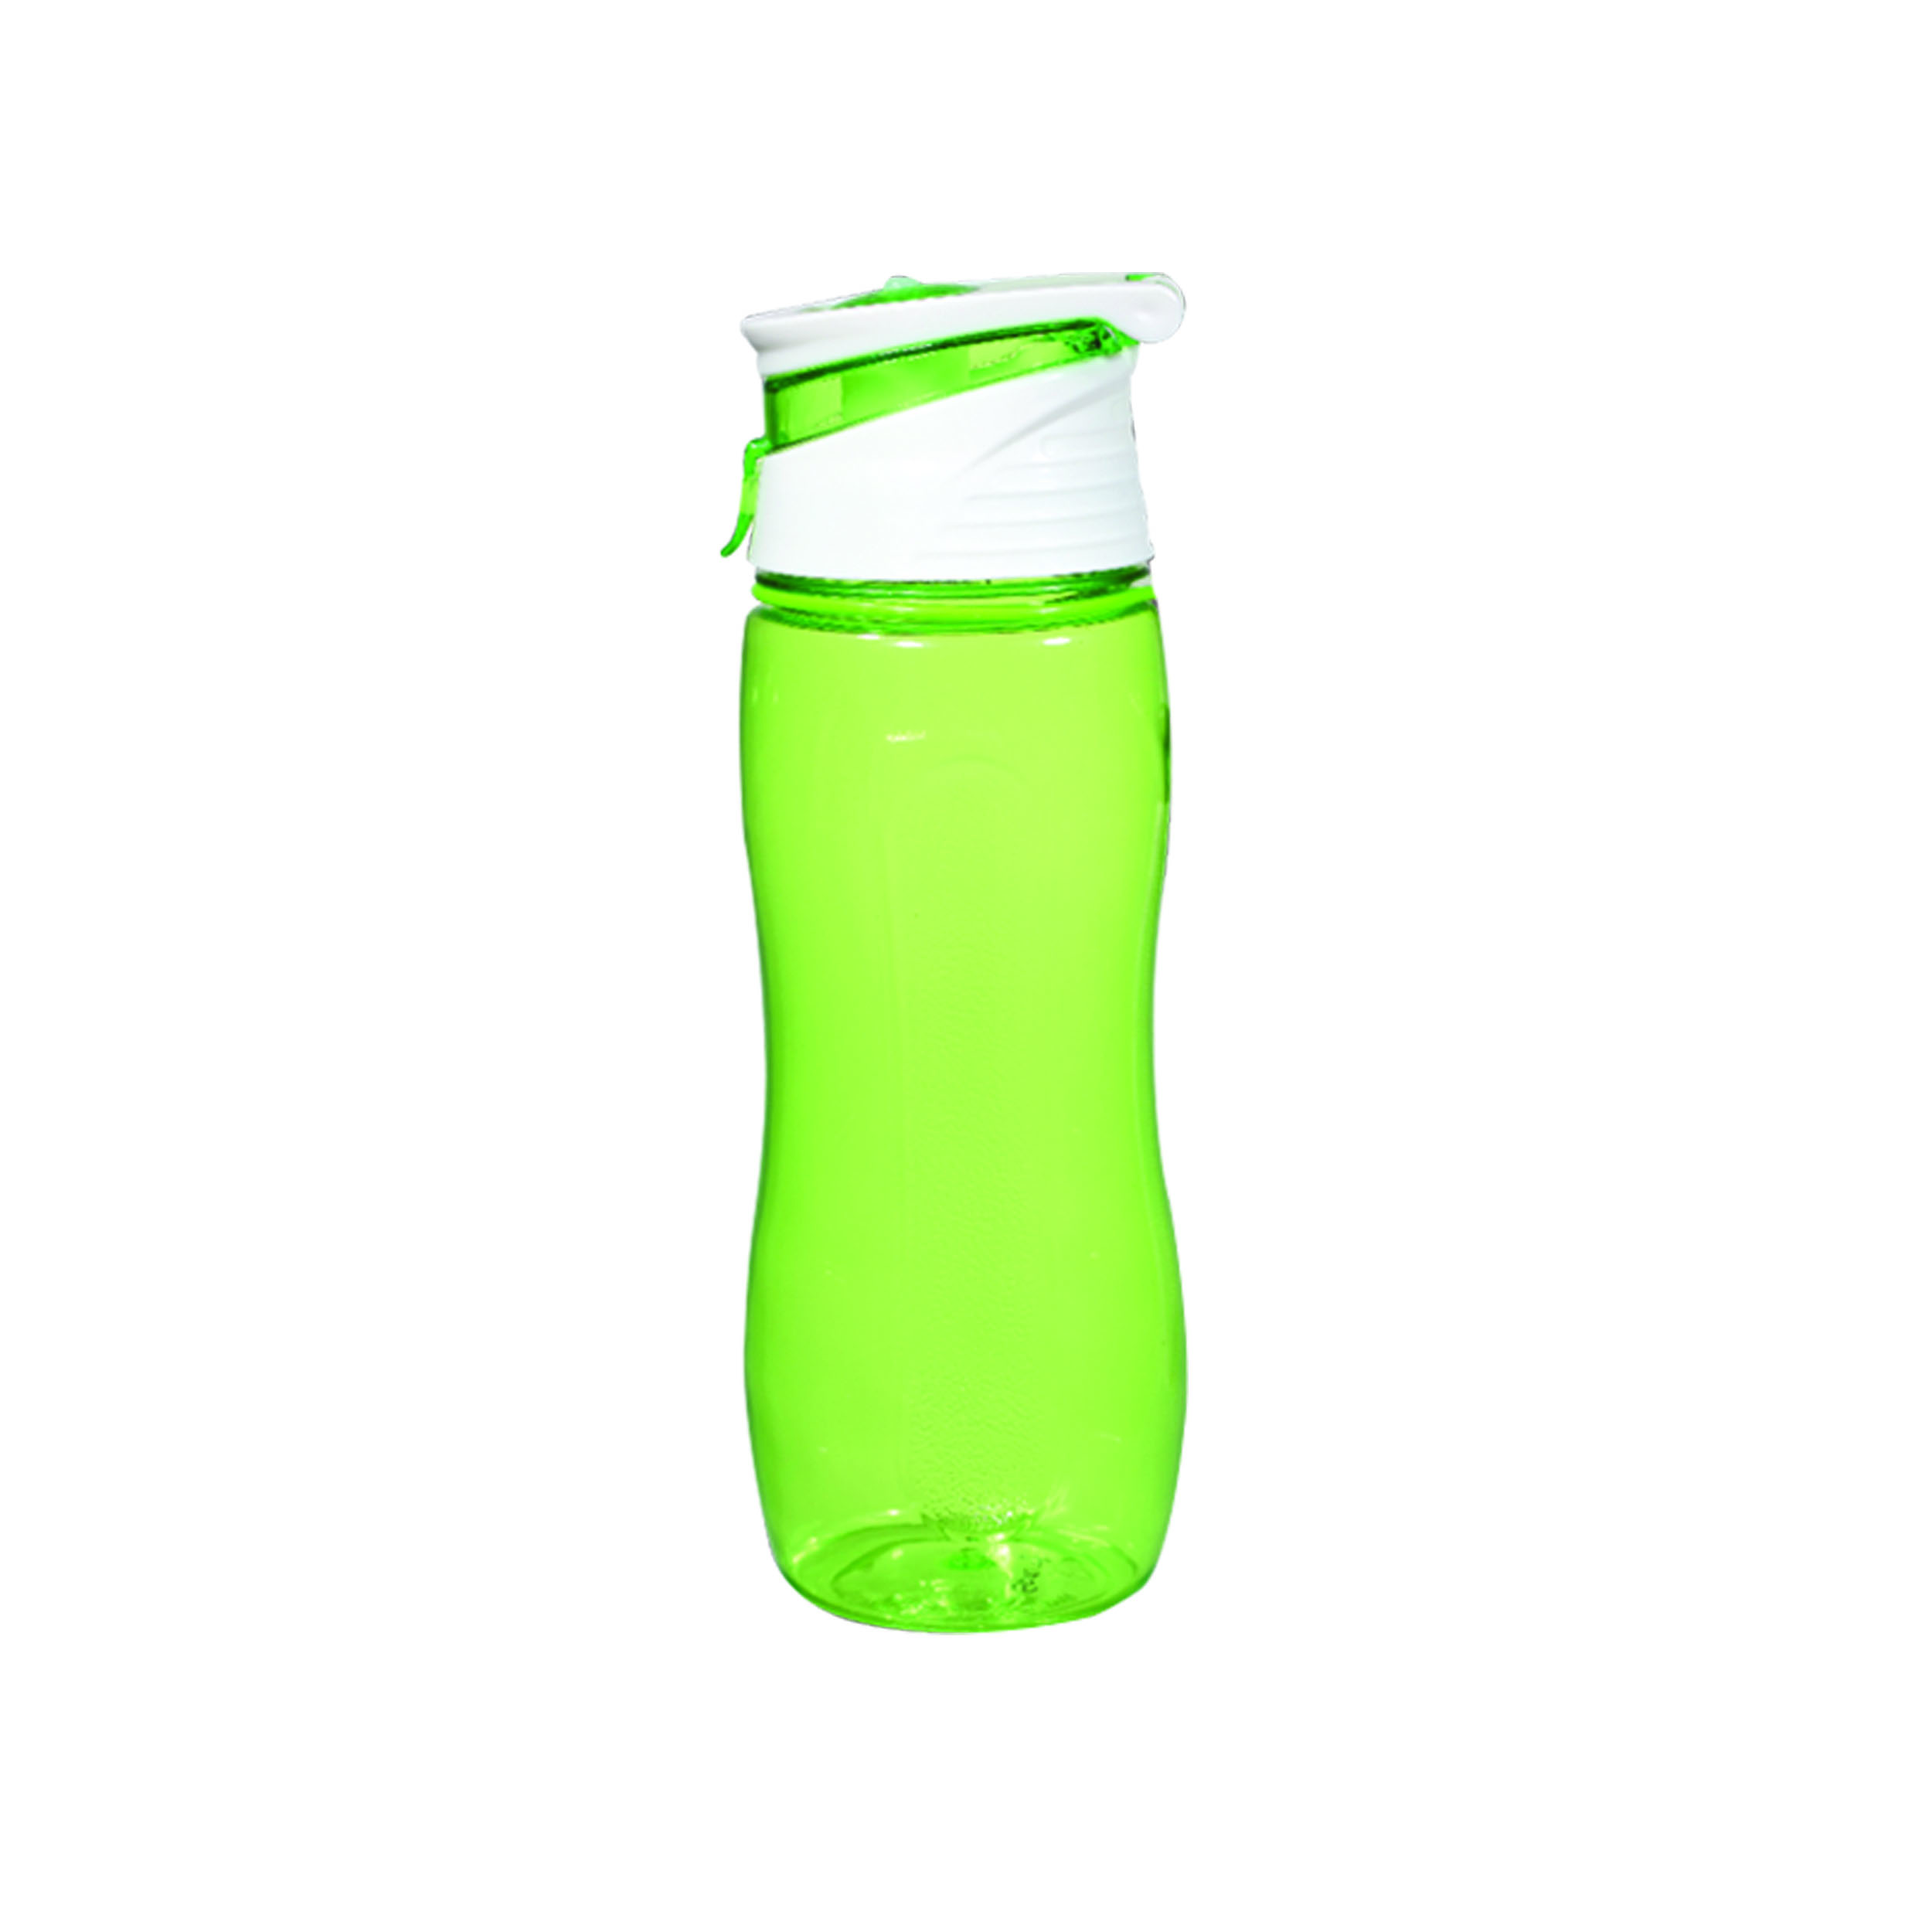 http://bluebell.org.nz/resources/uploads/products/3_75_Water_bottle_750ML.jpg